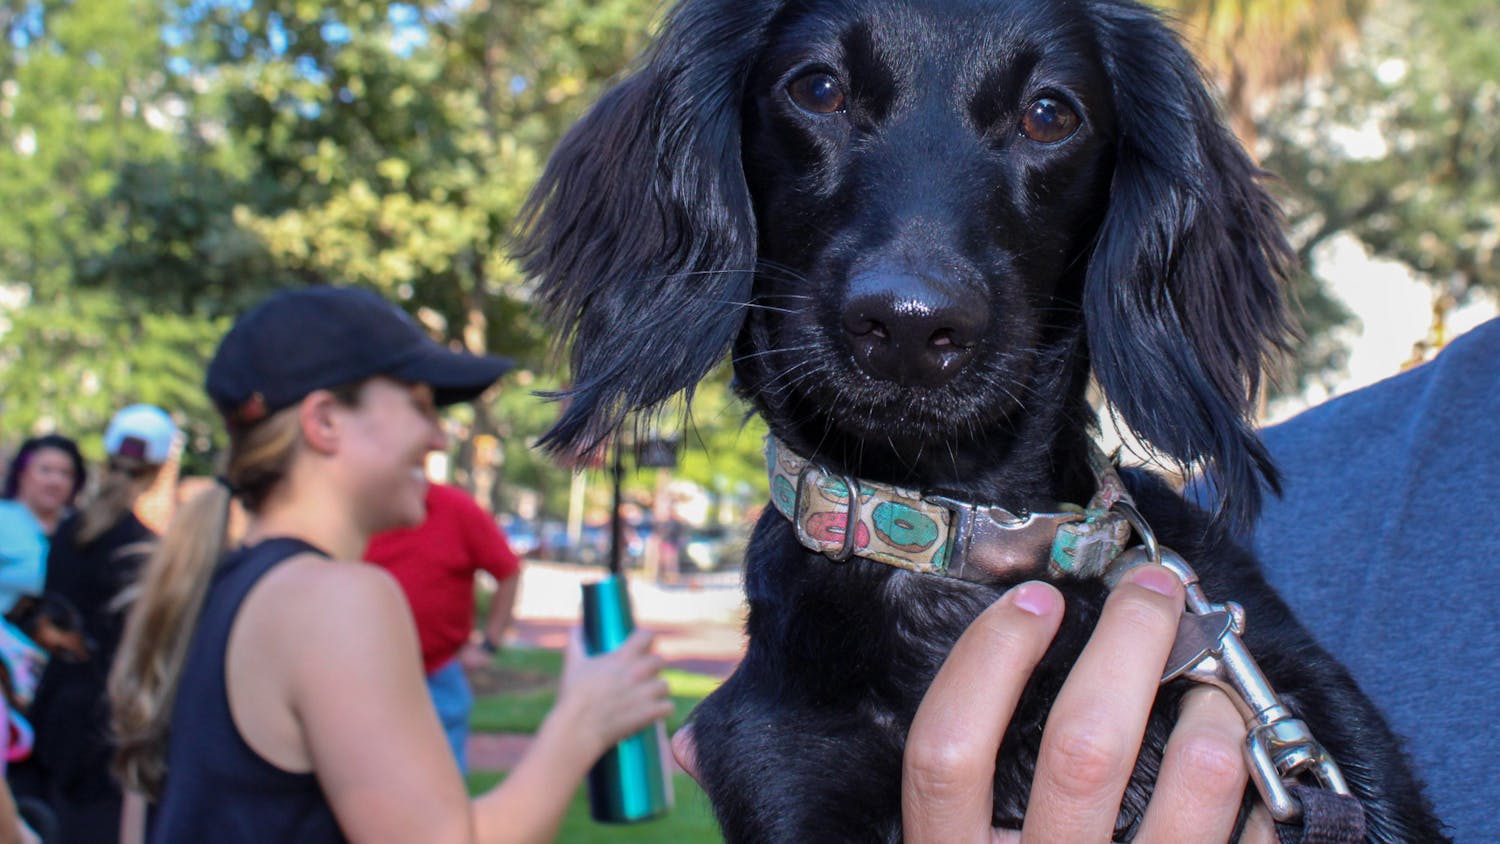 A dog walk participant holds their black dachshund during a social event held by the community dog-walking group Dachshunds of Columbia on Sept. 17, 2022. The group gathered with their furry friends for a walk through USC's Horseshoe on Saturday morning.